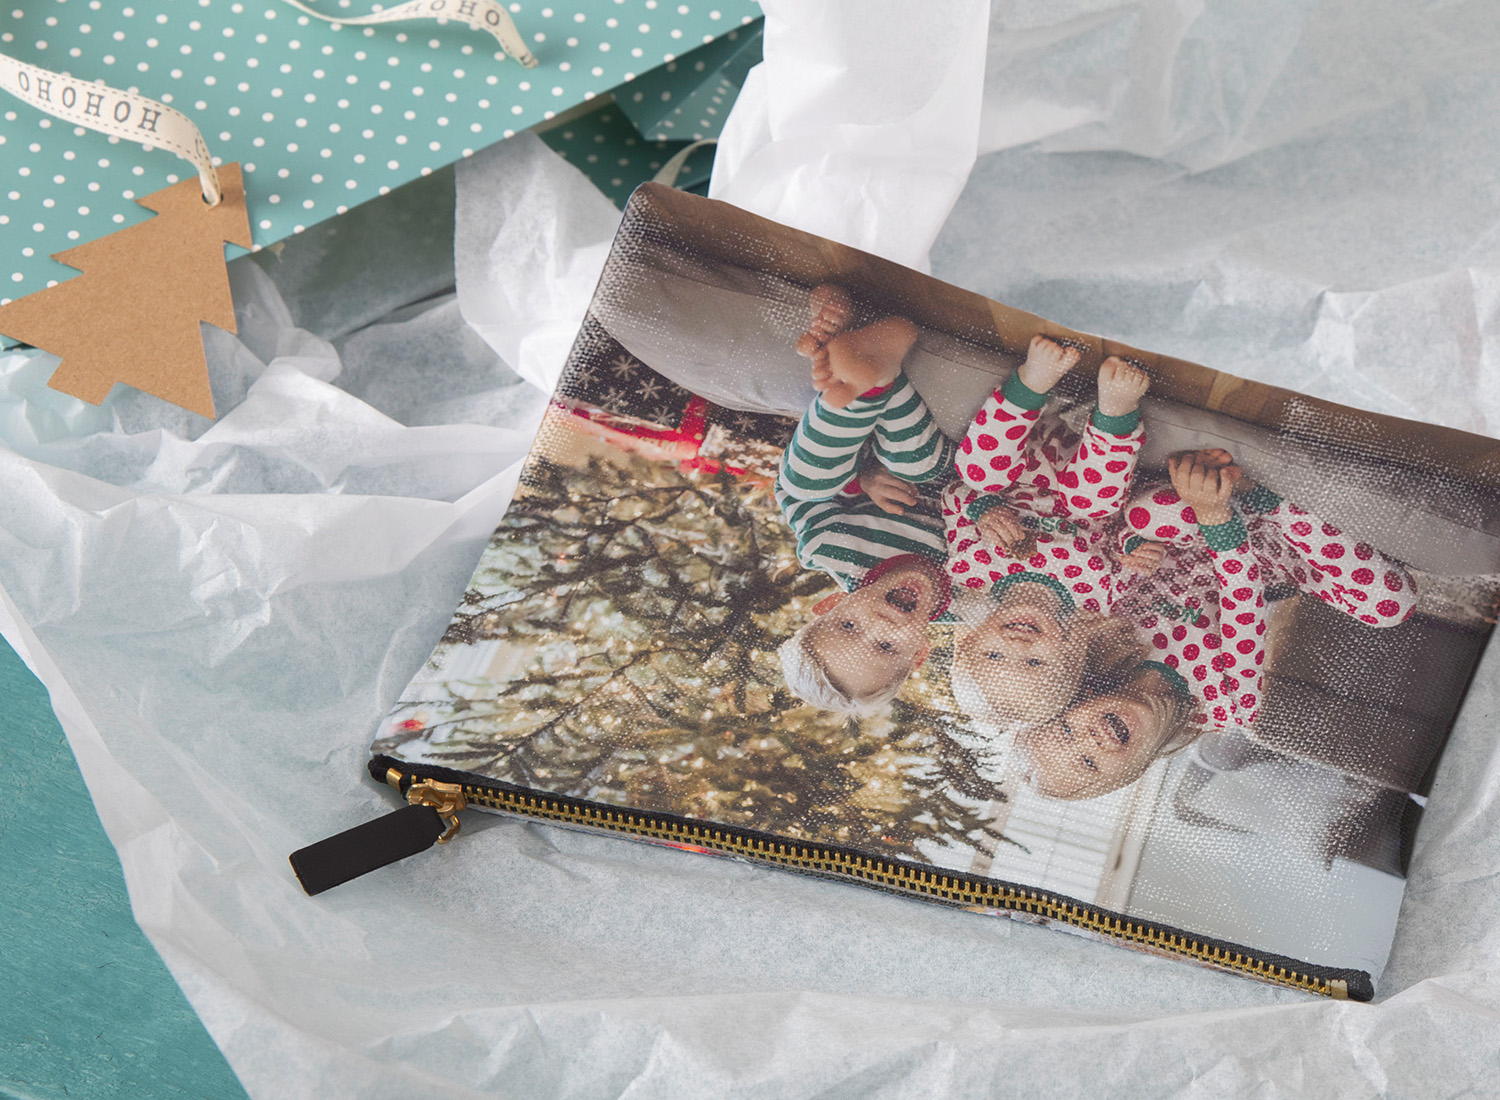 10 Gifts To Make Your Whole Family Happy | Photobox